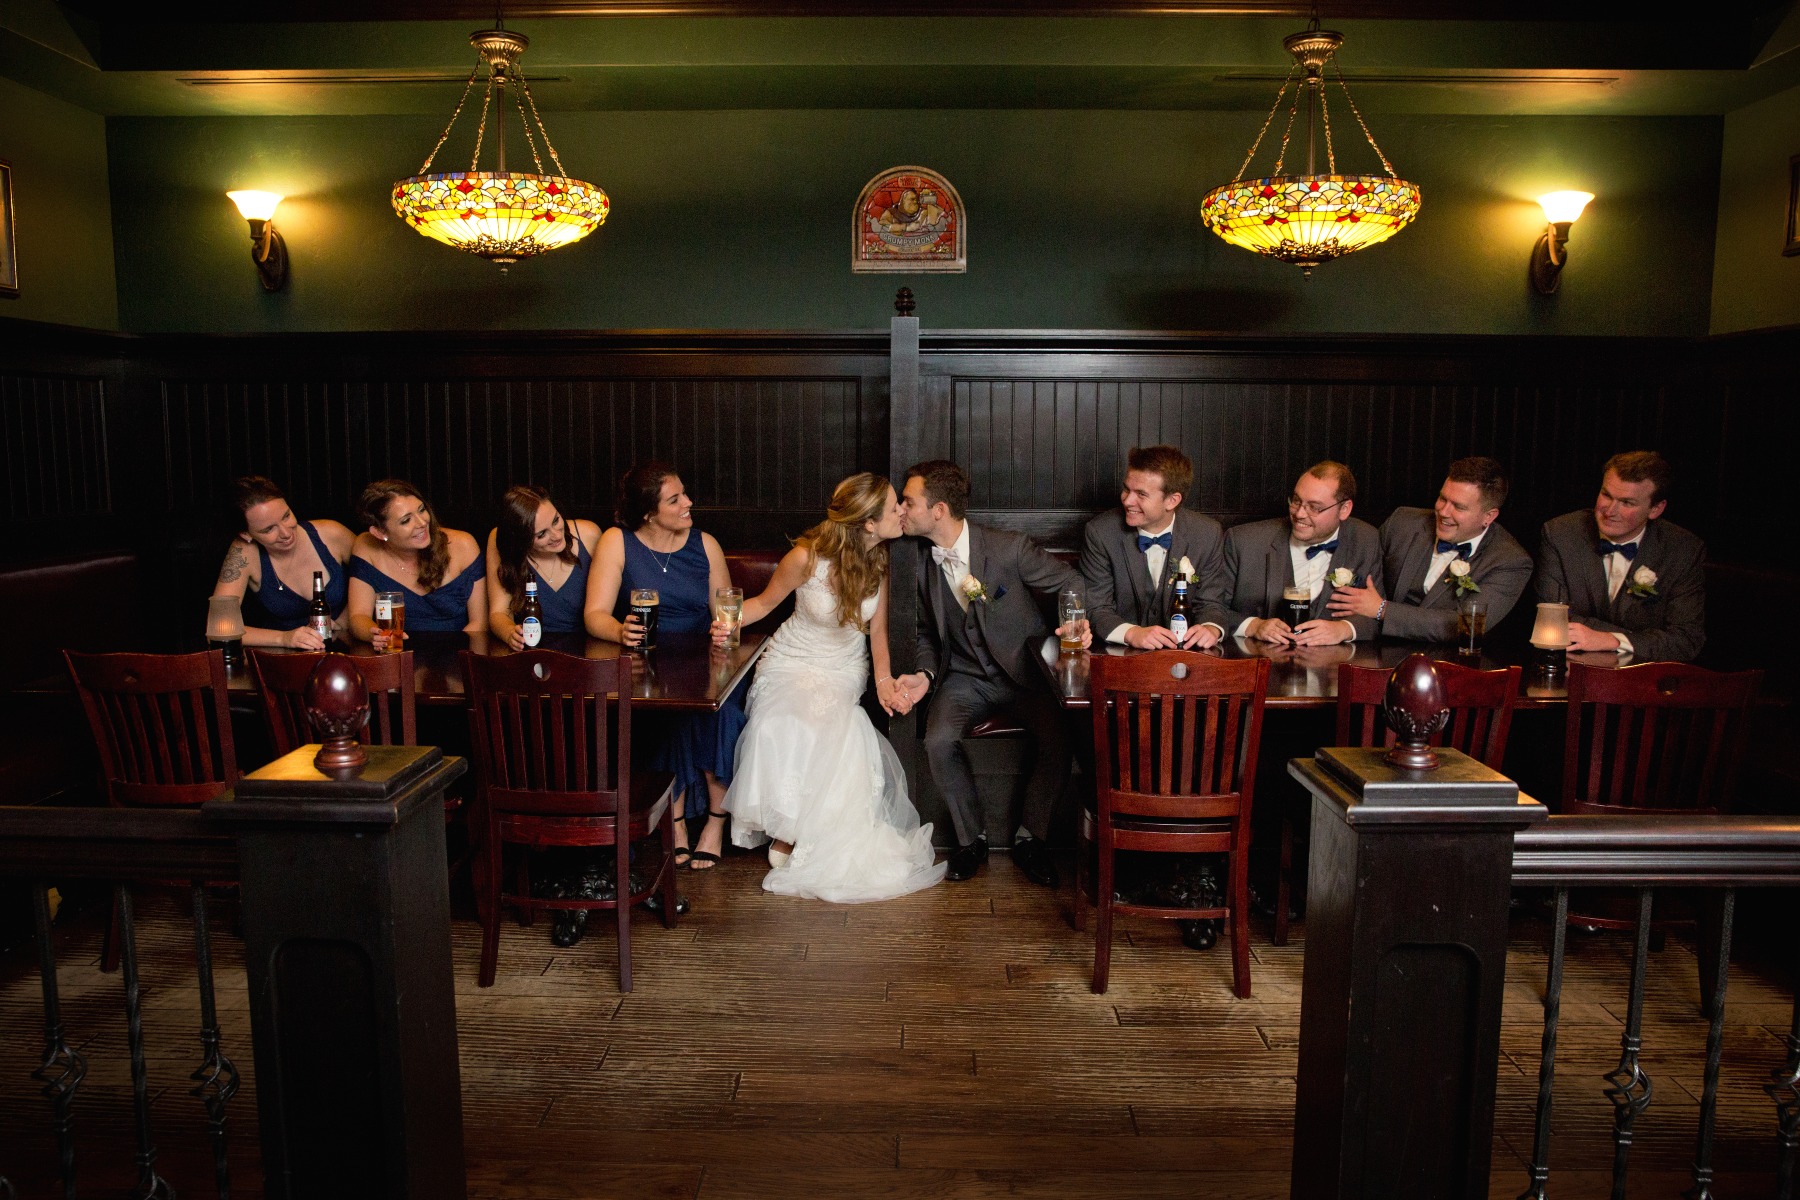 bride & groom kiss in a irish pub wooden booth while wedding party looks on